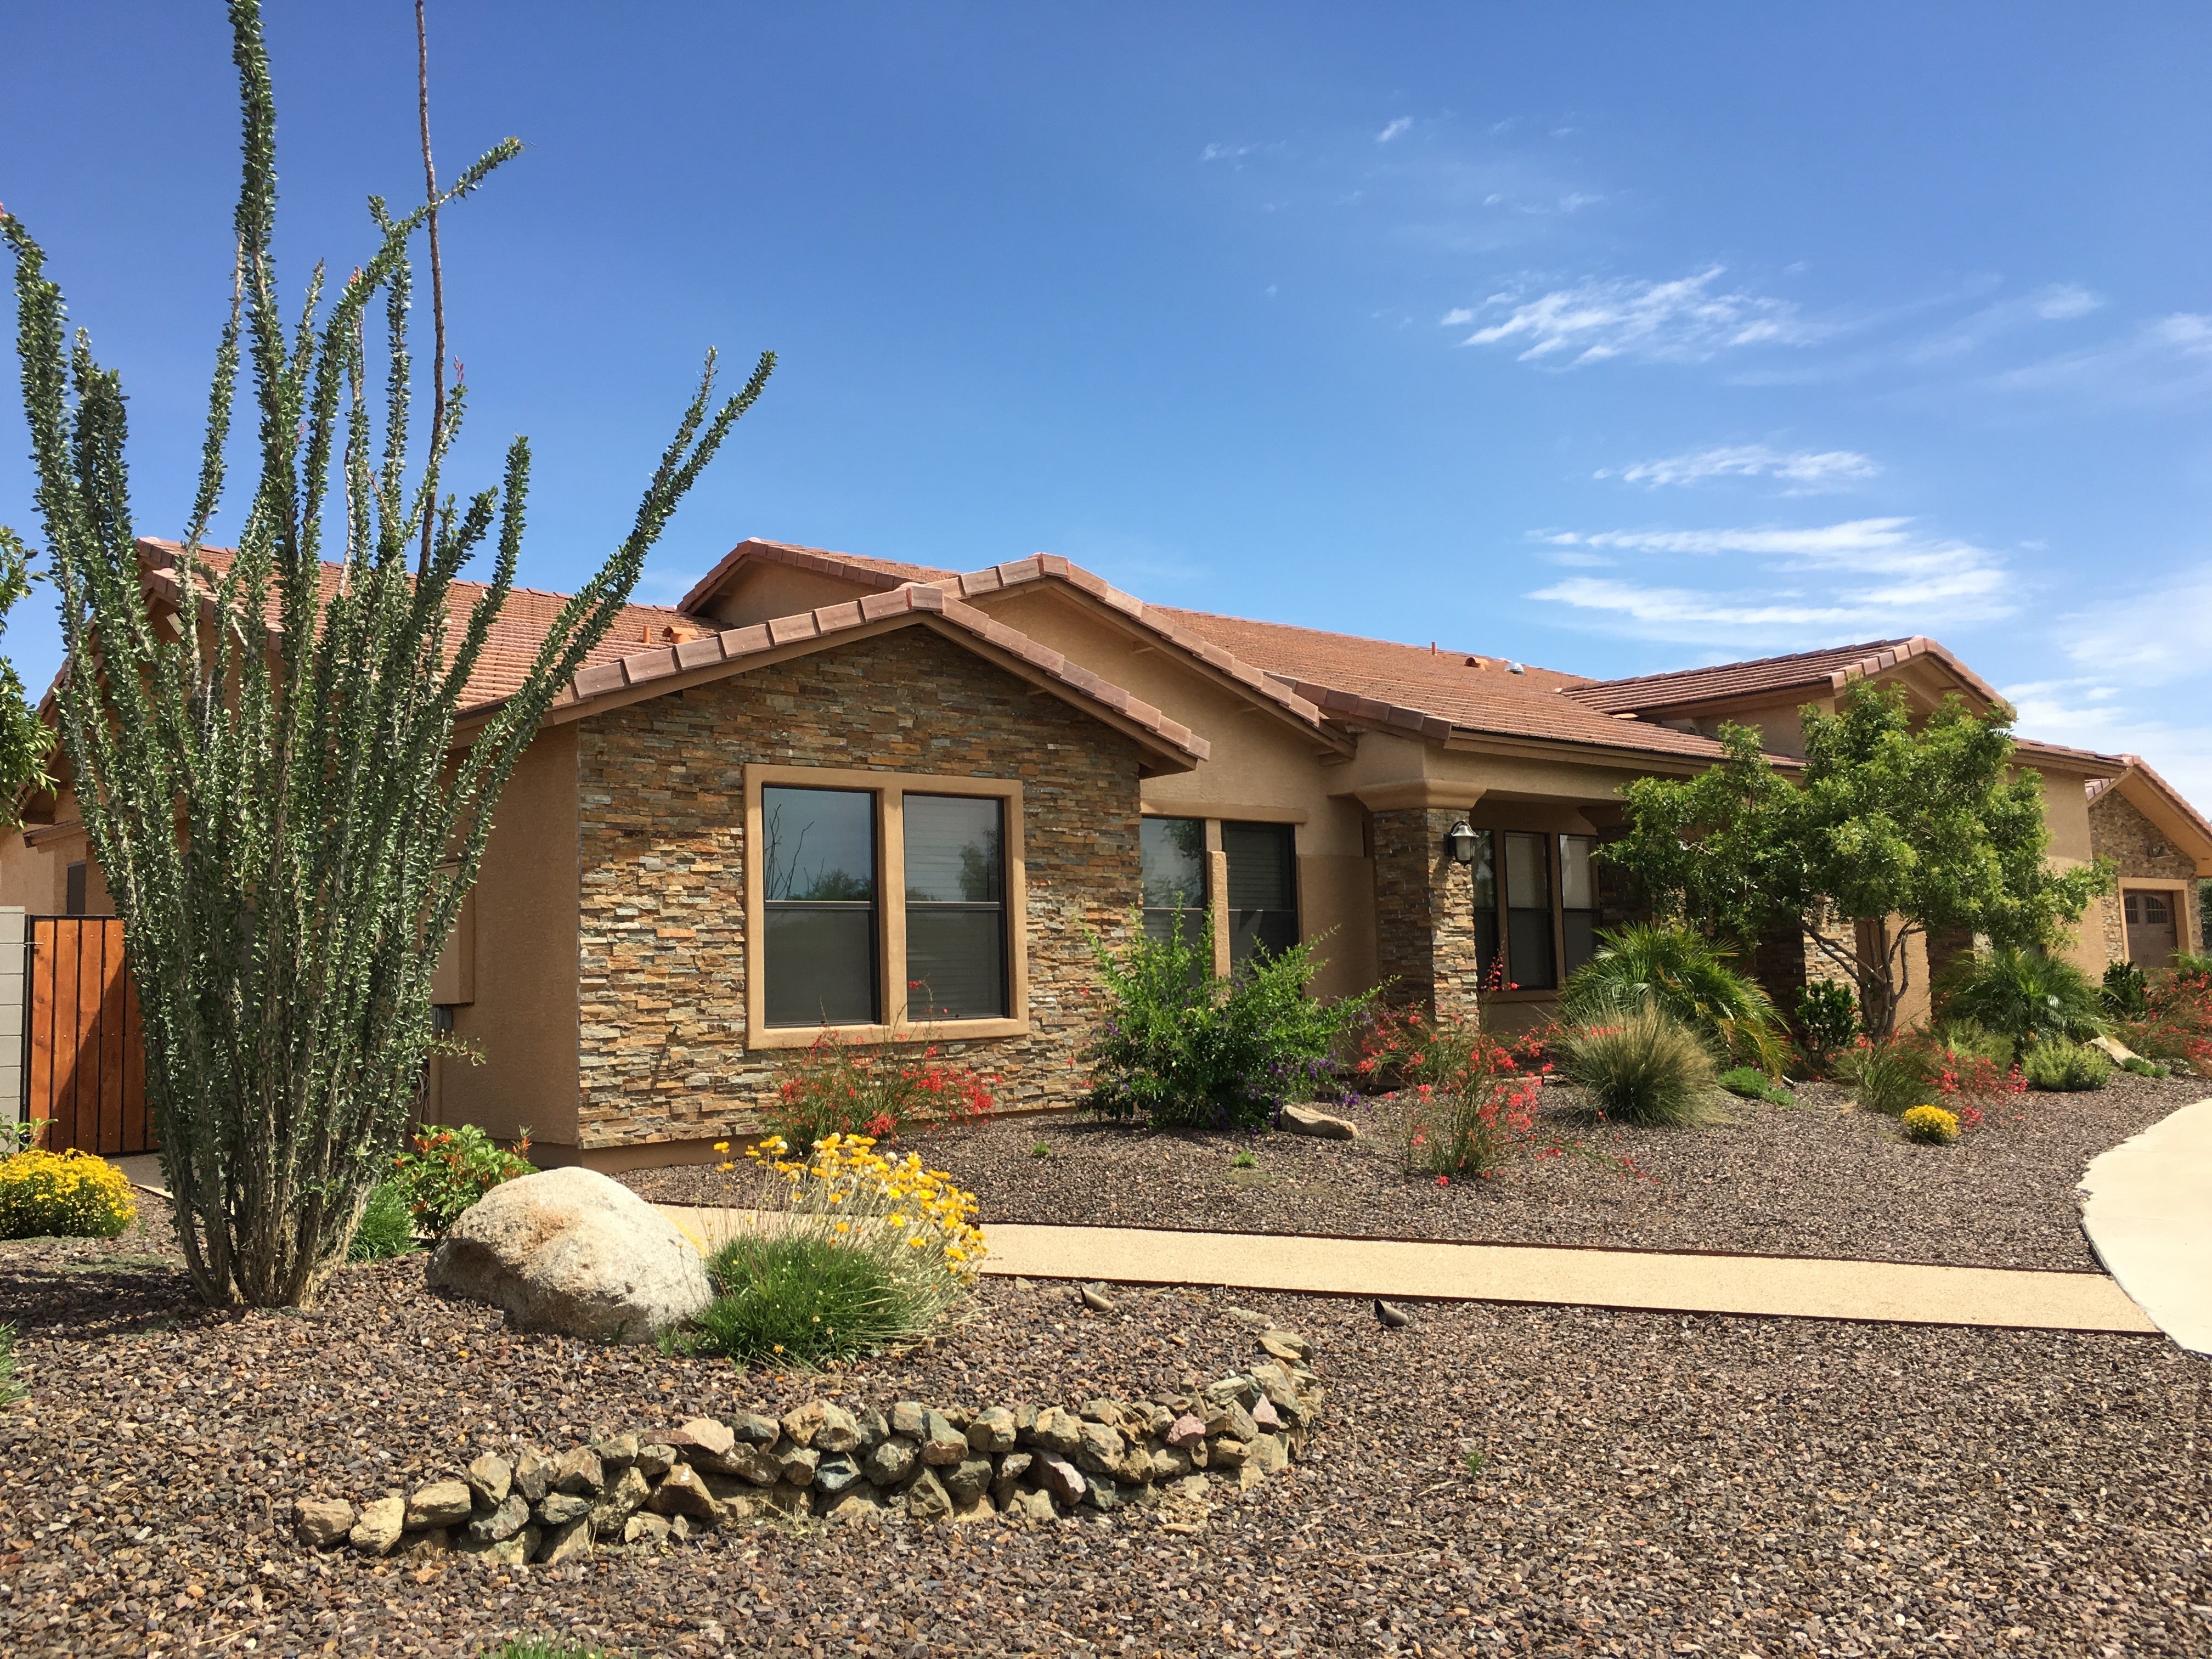 A home in the desert with light brown siding and brown shingles